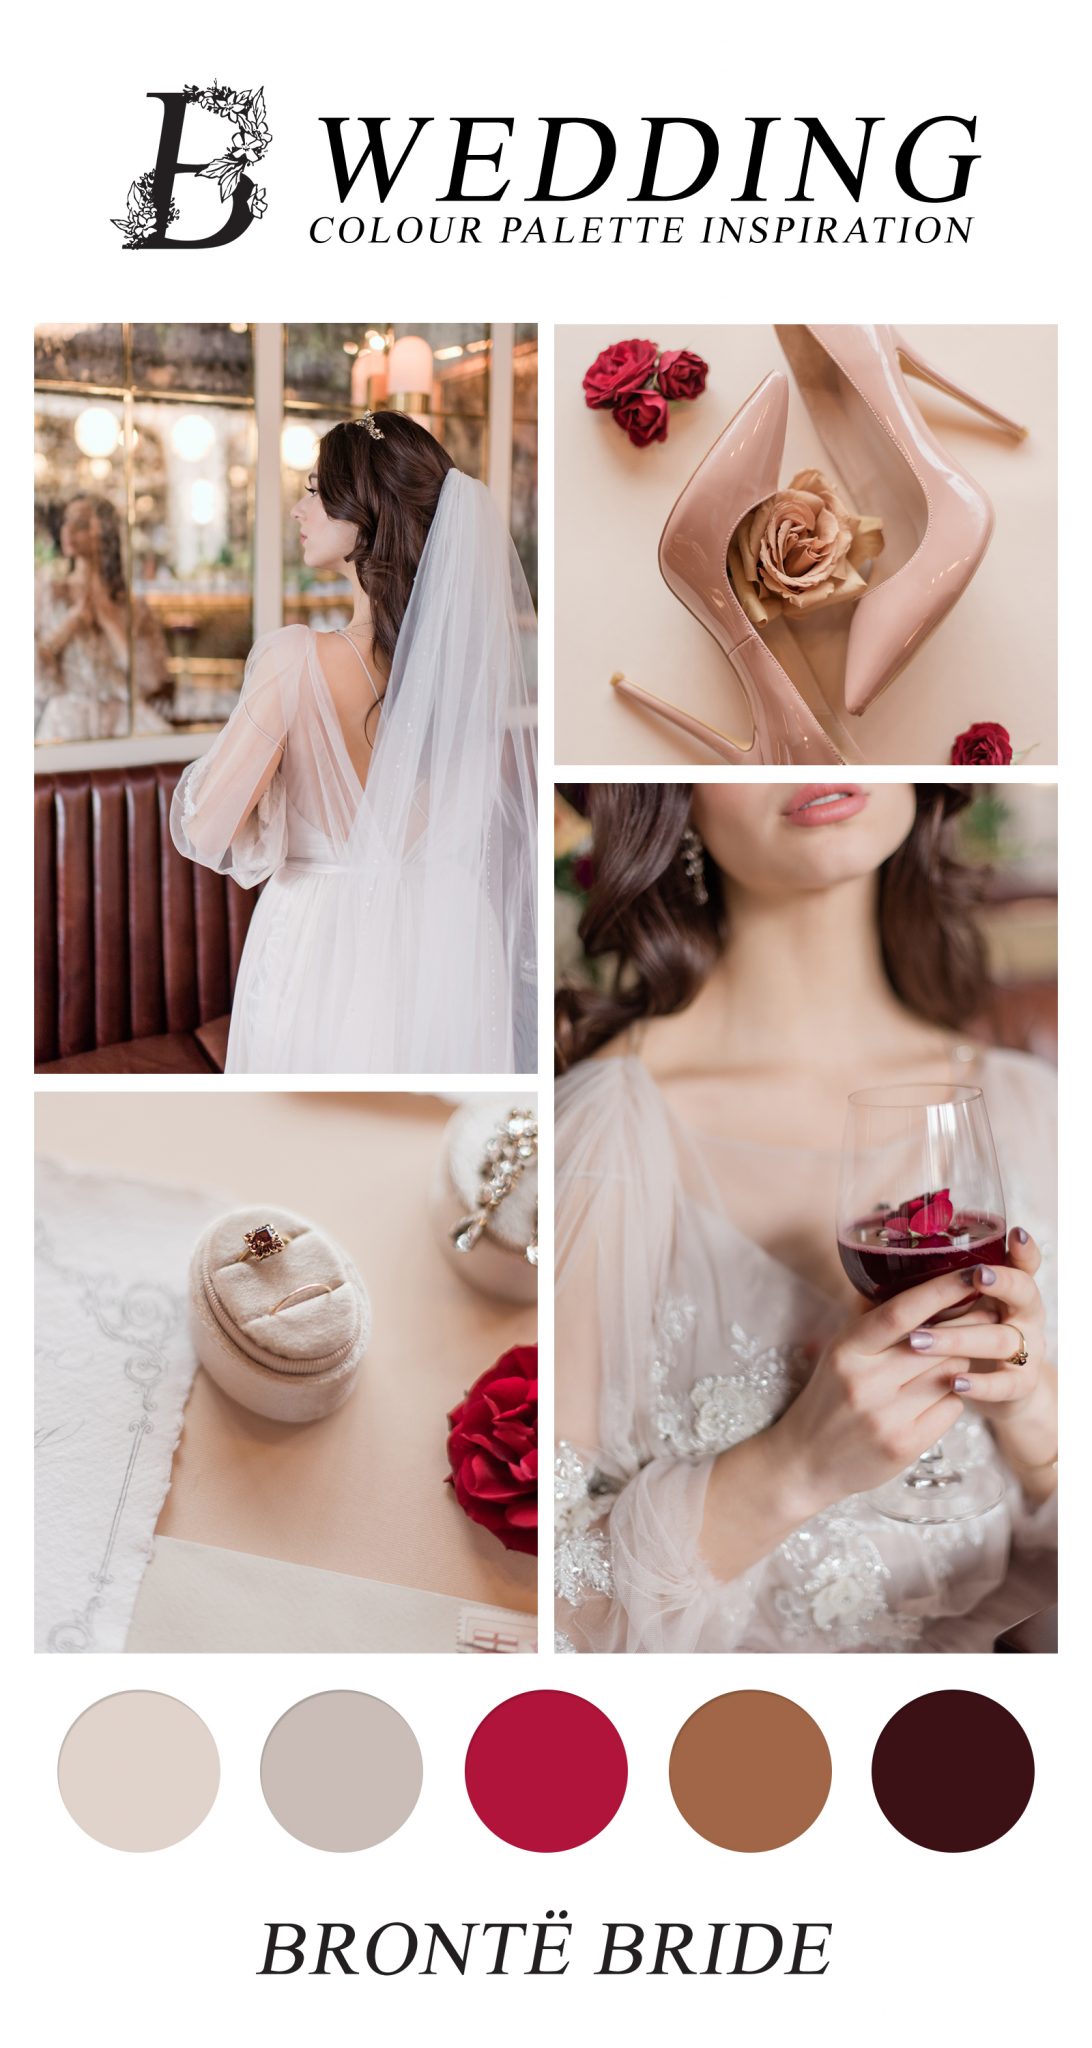 Romantically Regal Bridal Inspiration at the Royale YYC - wedding inspiration featured on Brontë Bride - Modern Wedding Colour Palette Inspiration